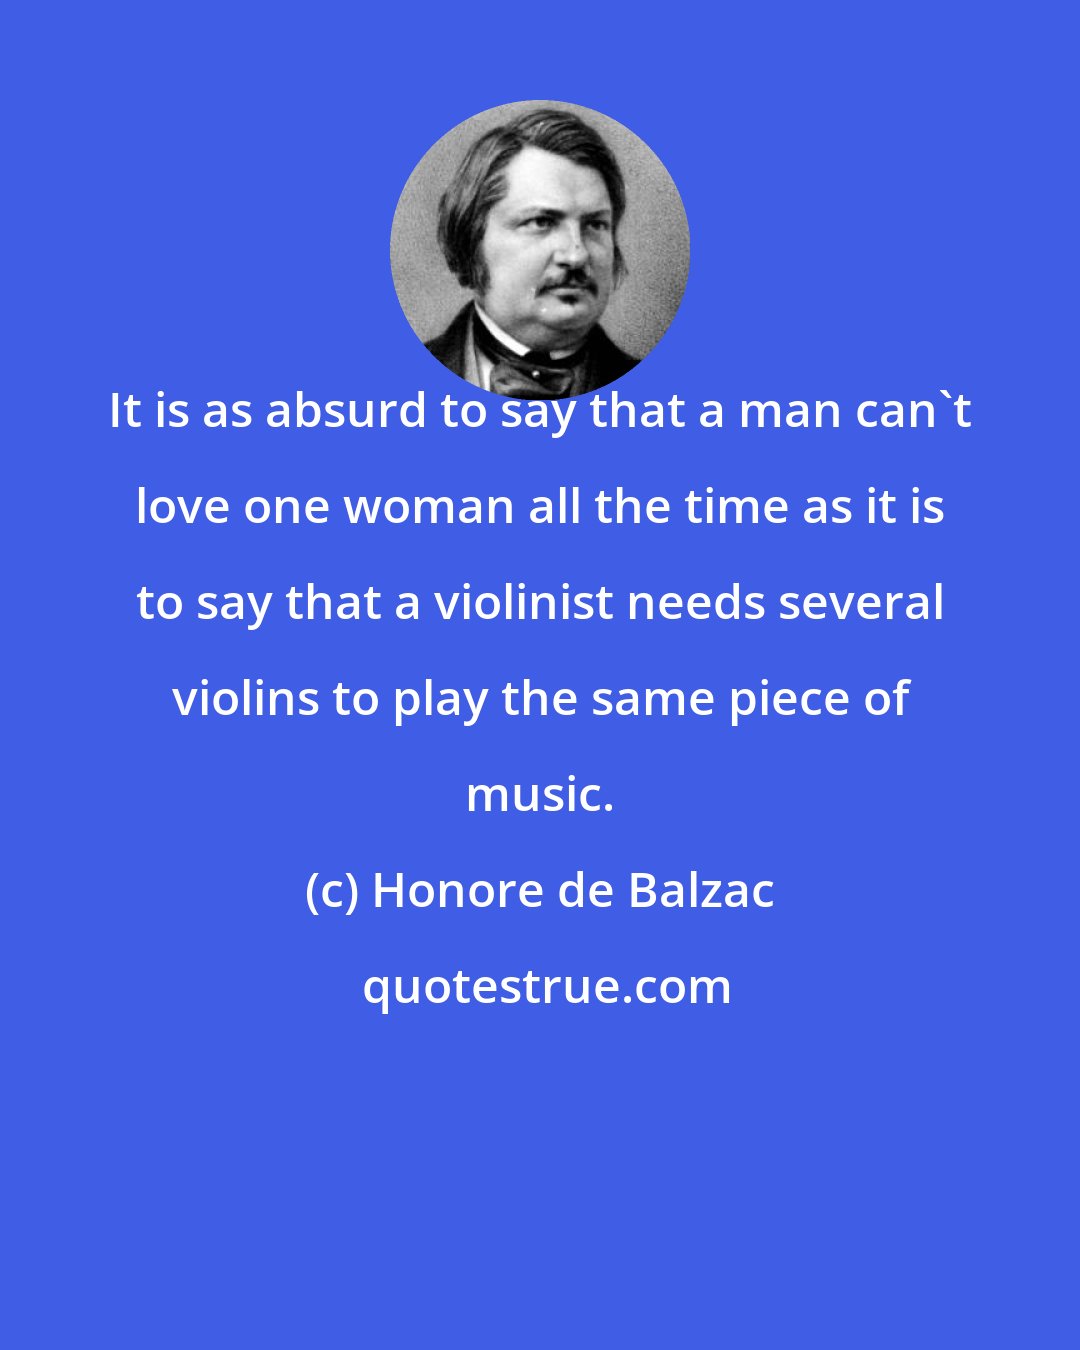 Honore de Balzac: It is as absurd to say that a man can't love one woman all the time as it is to say that a violinist needs several violins to play the same piece of music.